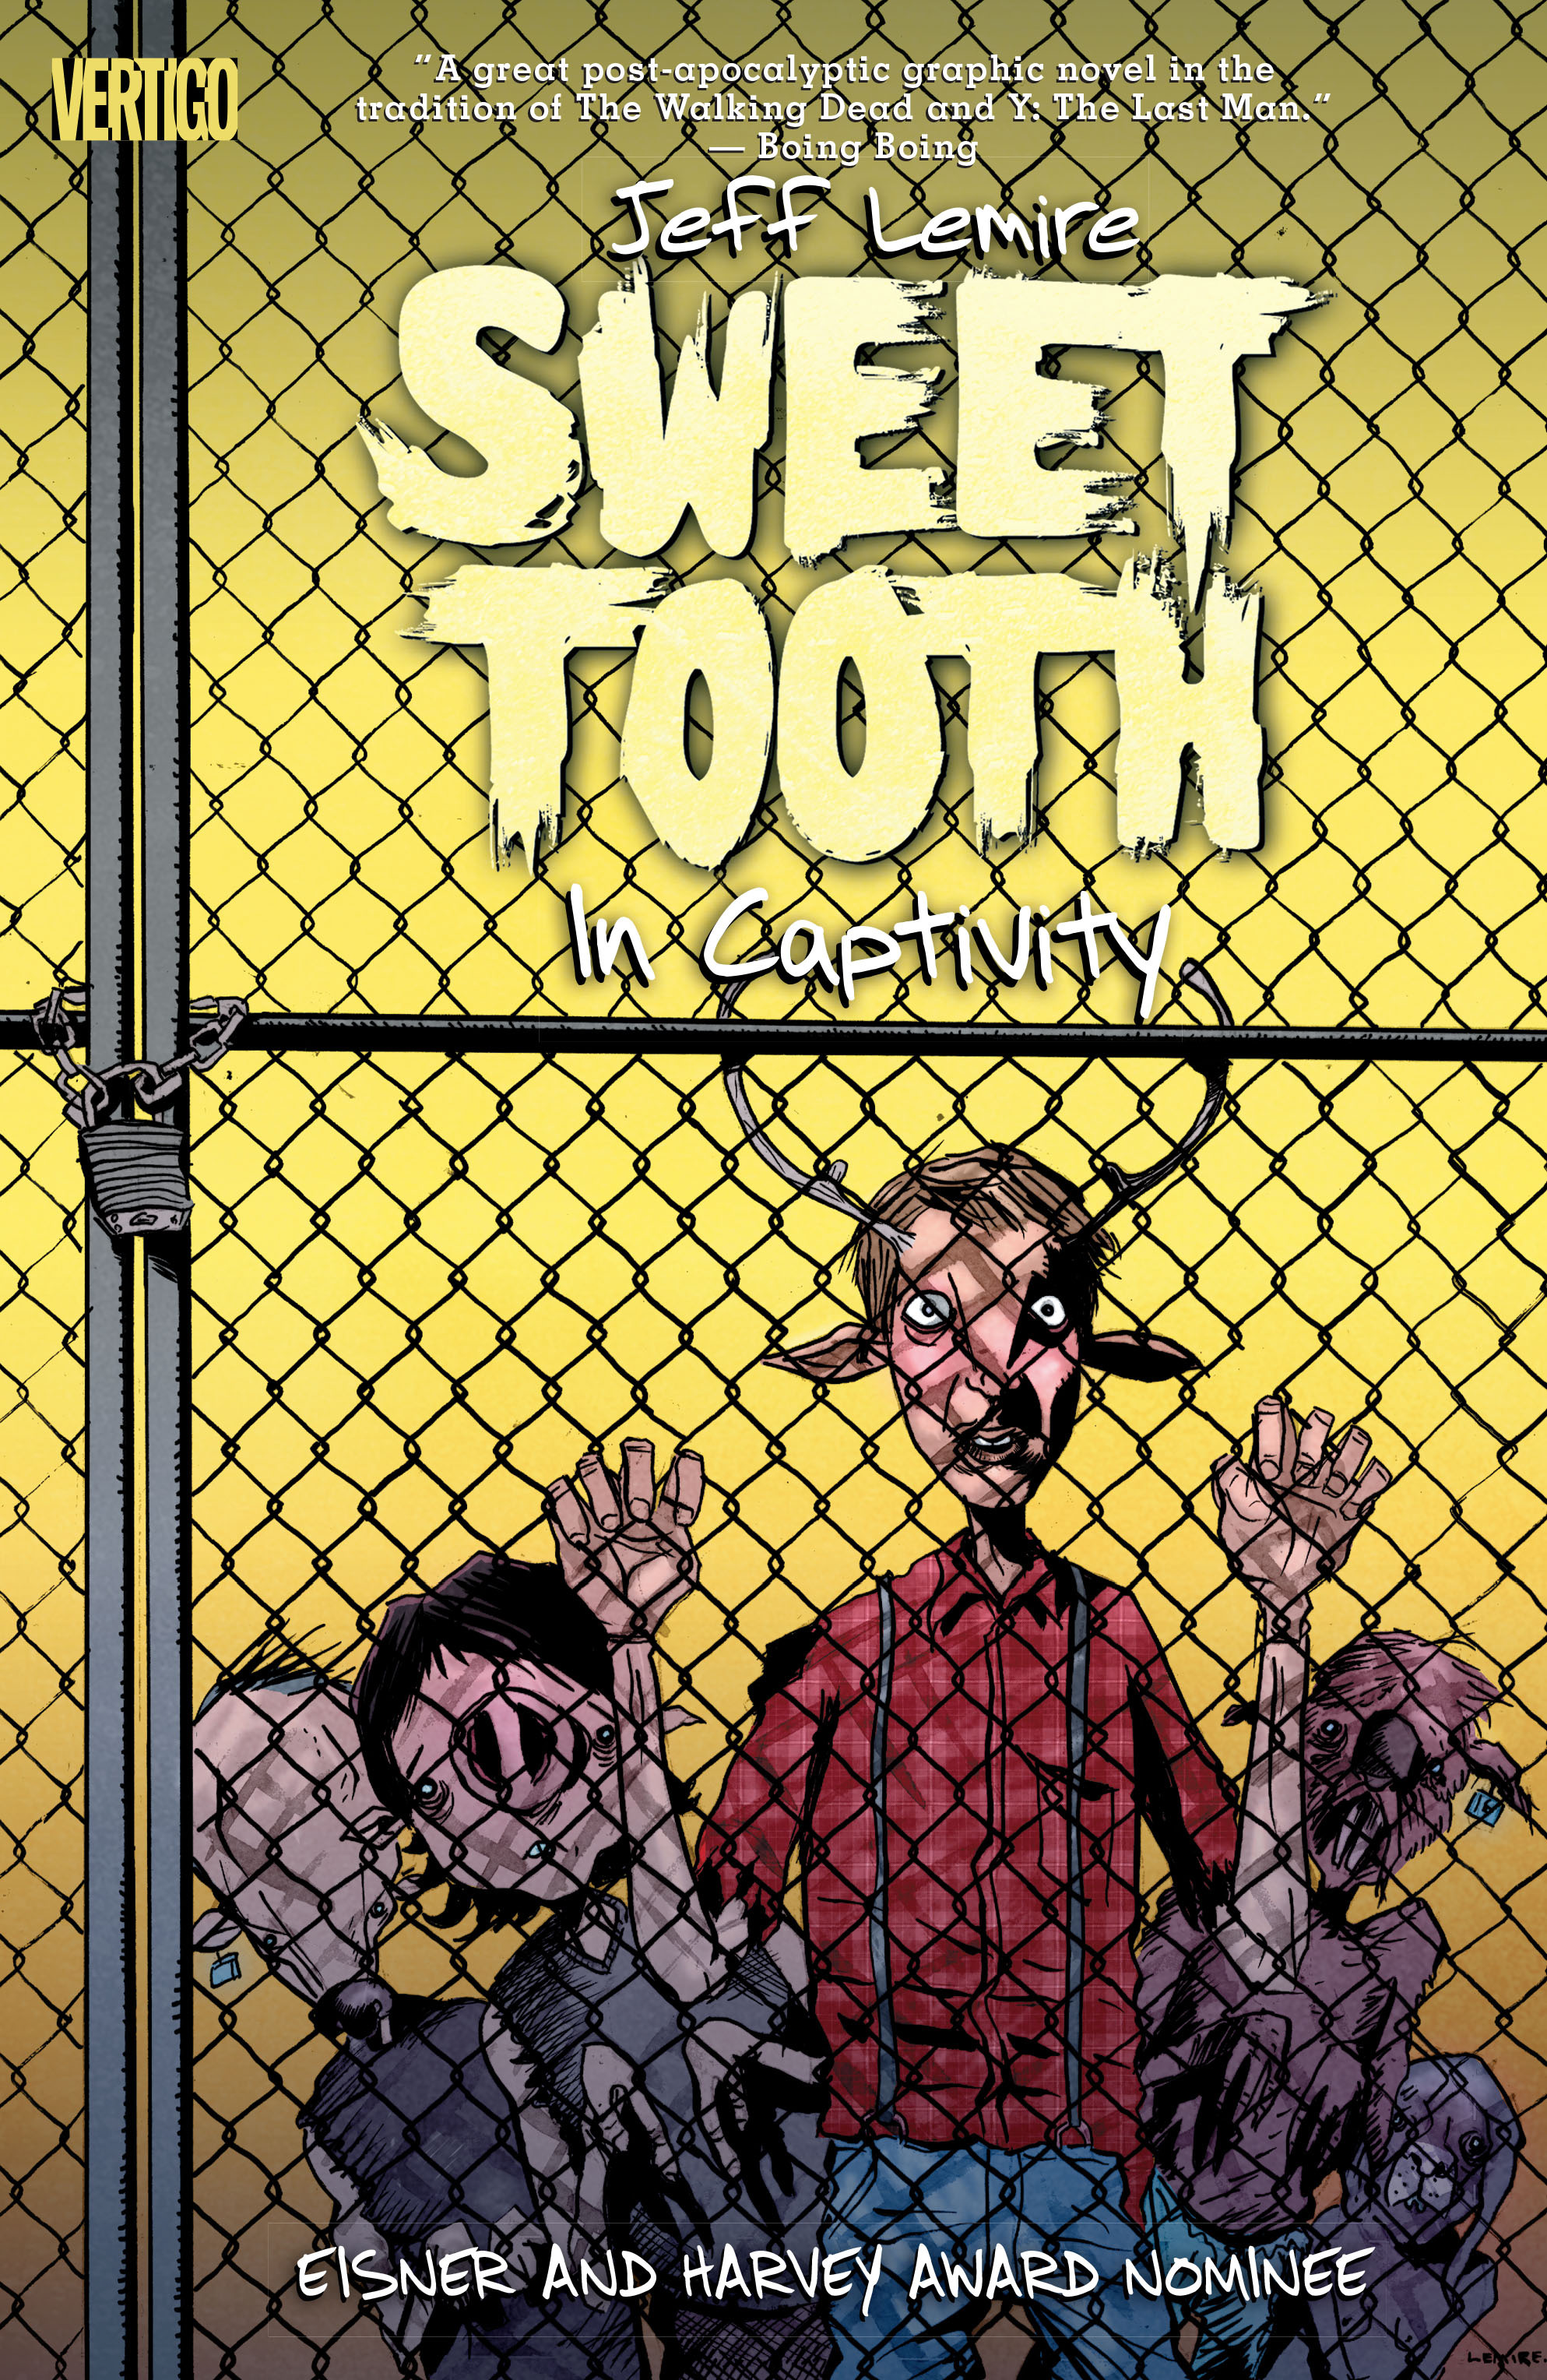 Read online Sweet Tooth comic -  Issue # TPB 2 - 1